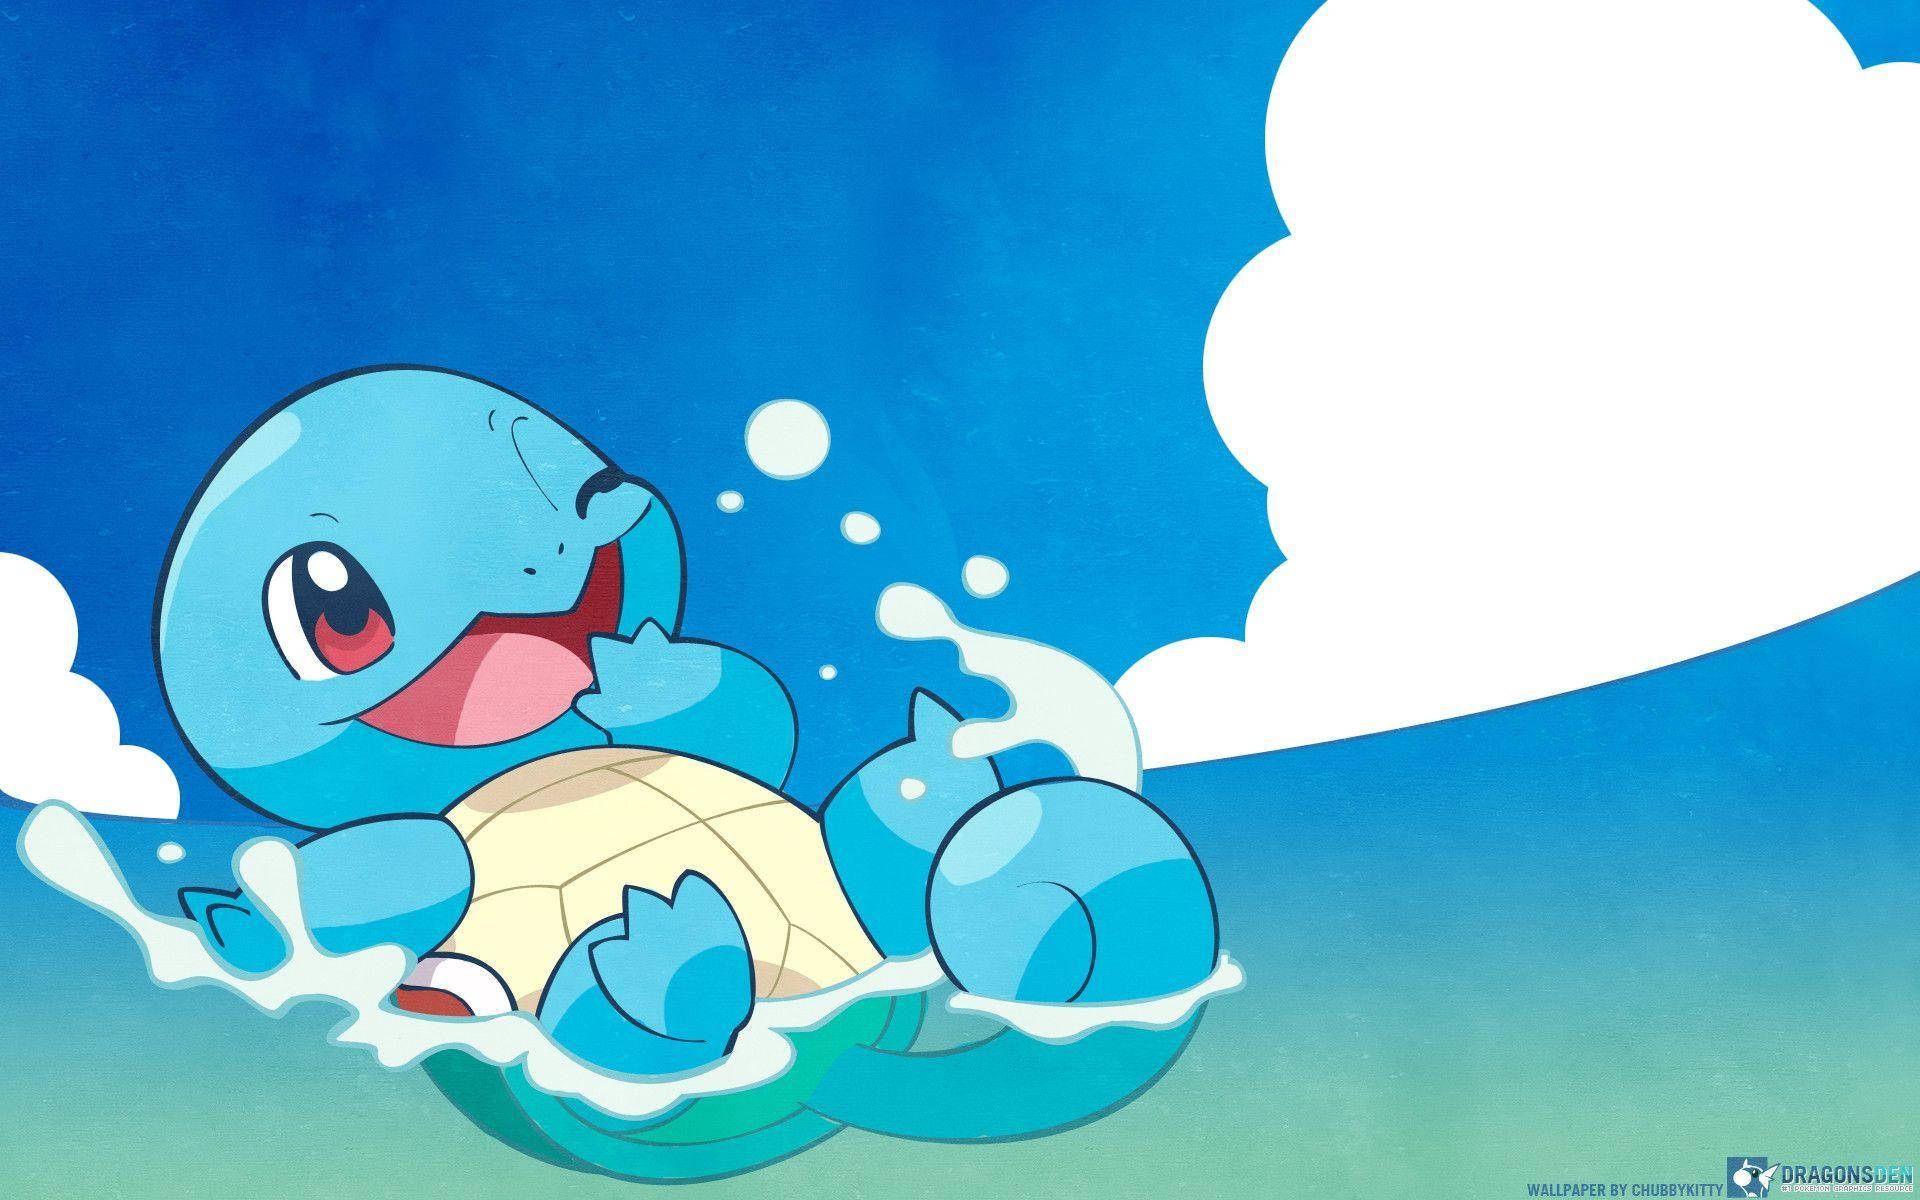 'an Artistic Take On The Iconic Pokemon Squirtle' Background